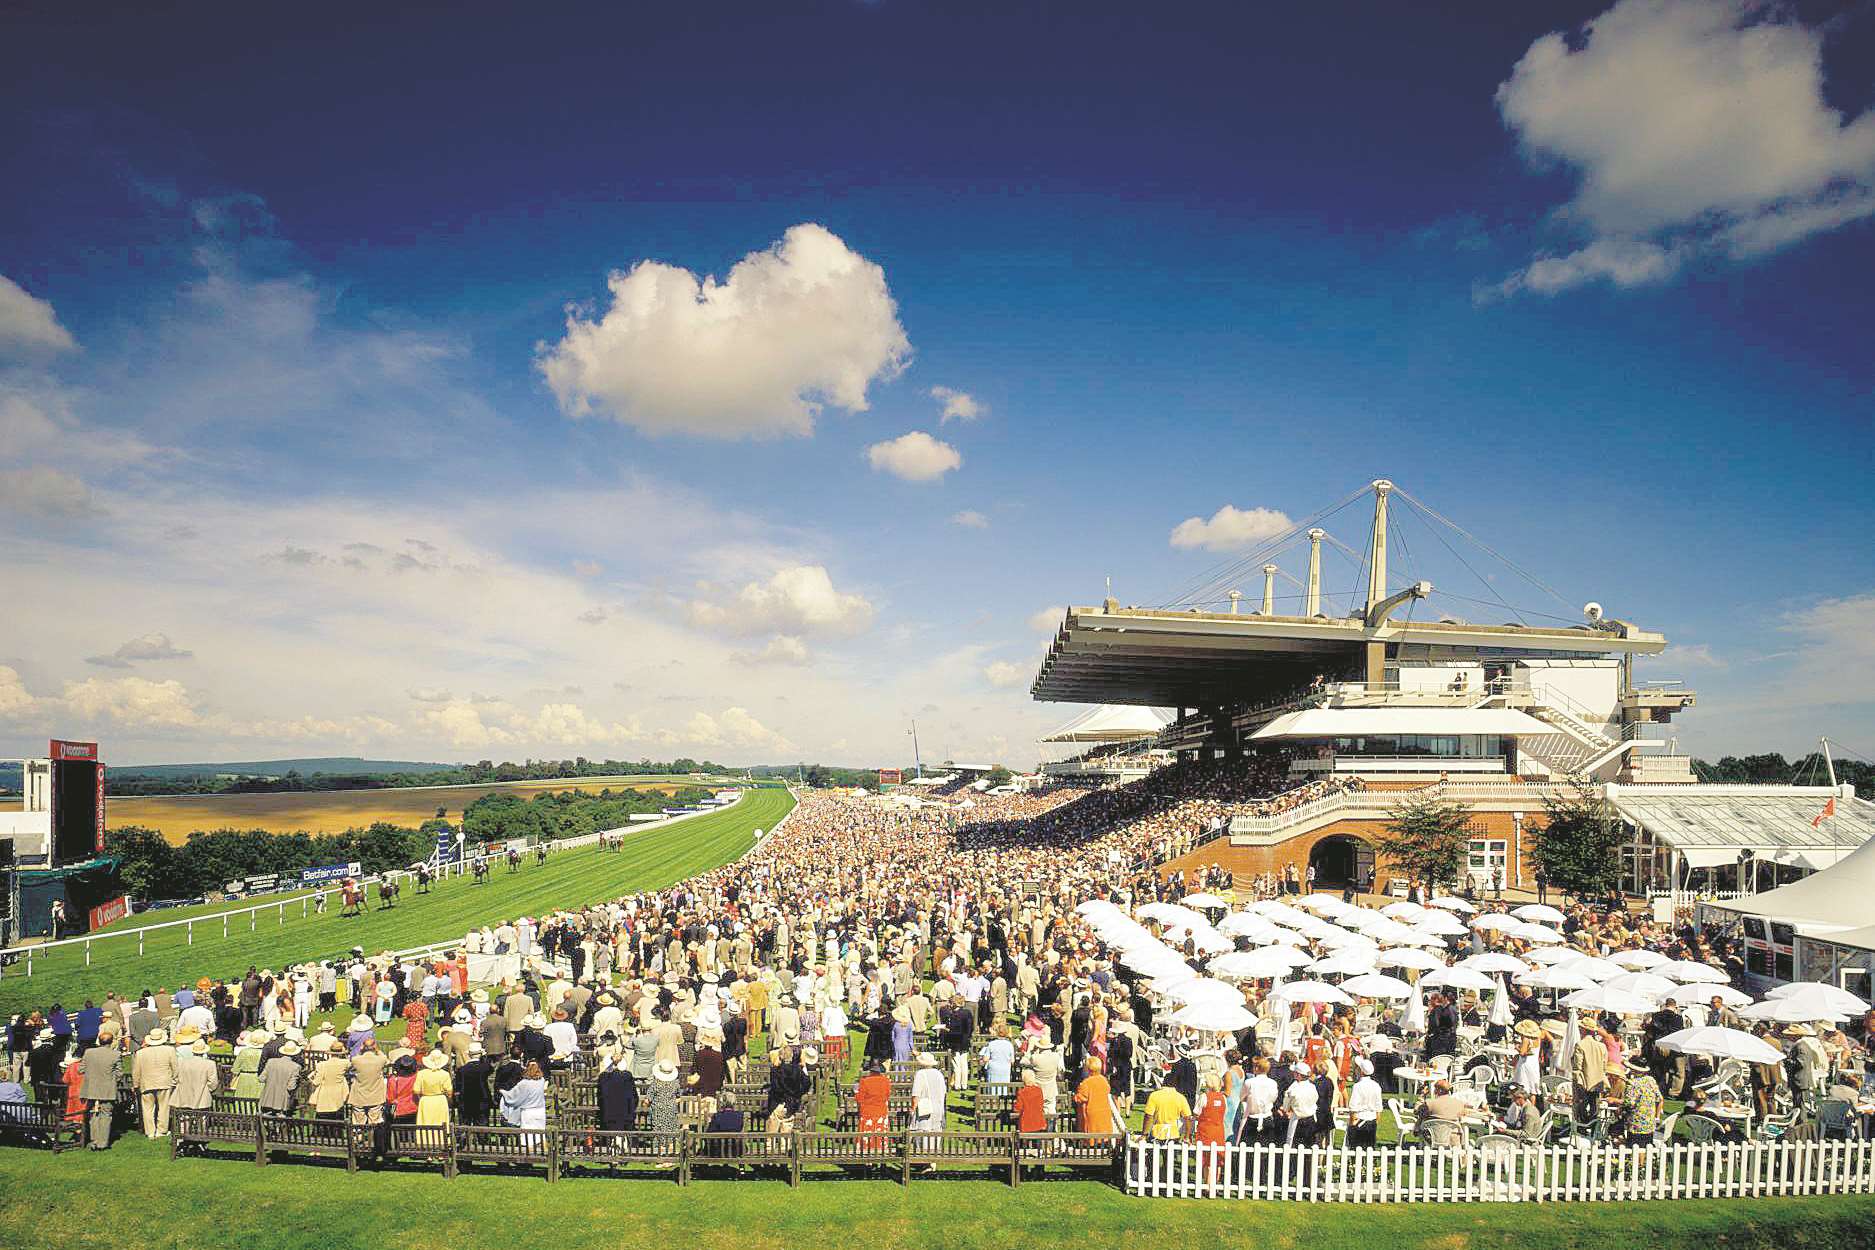 Goodwood Racecourse near Chichester in West Sussex